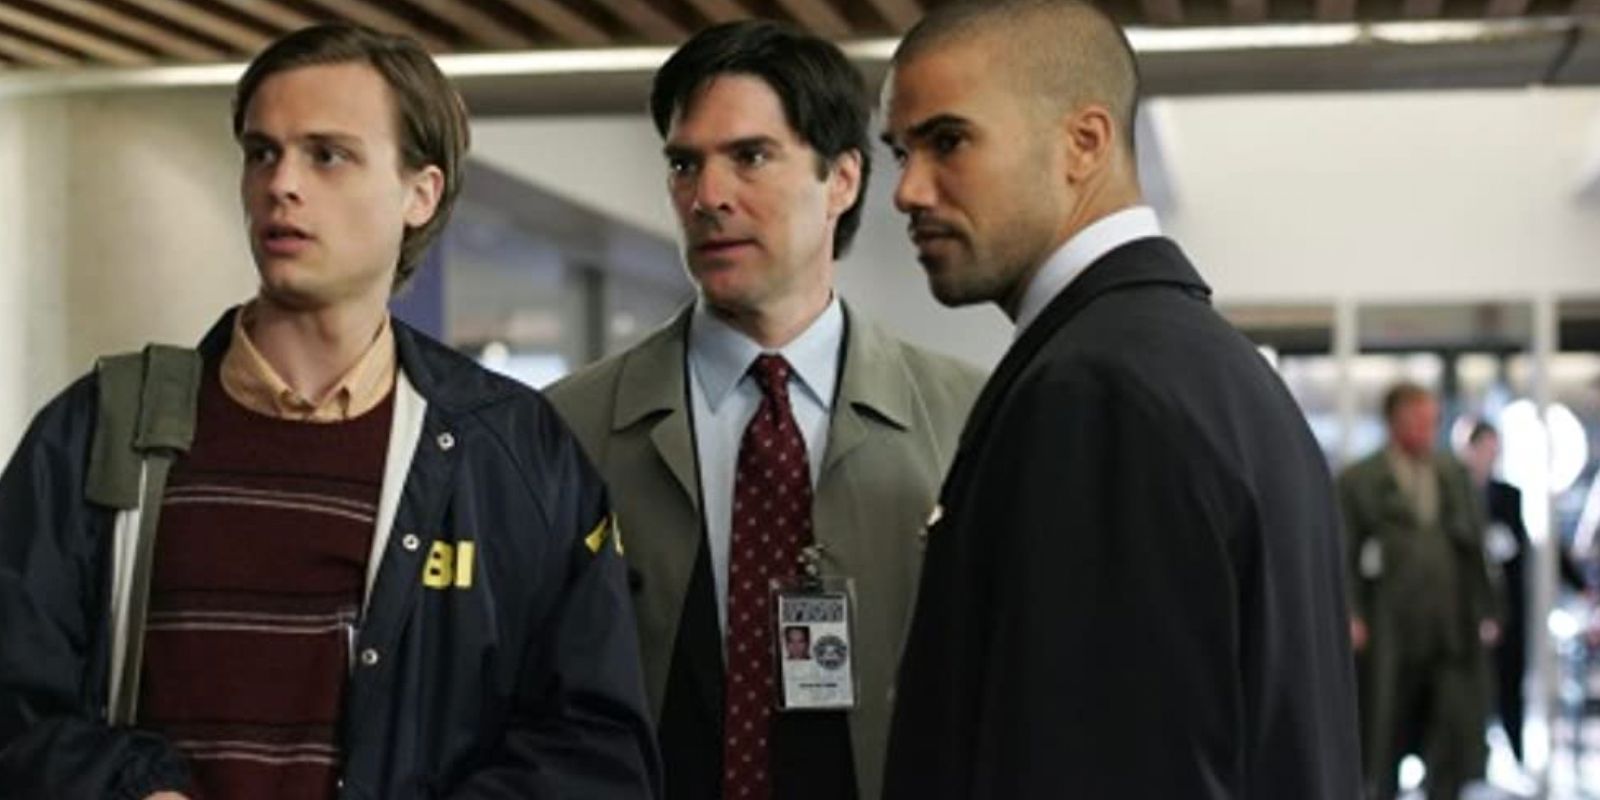 Reid, Hotch, and Morgan together in the first Criminal Minds episode